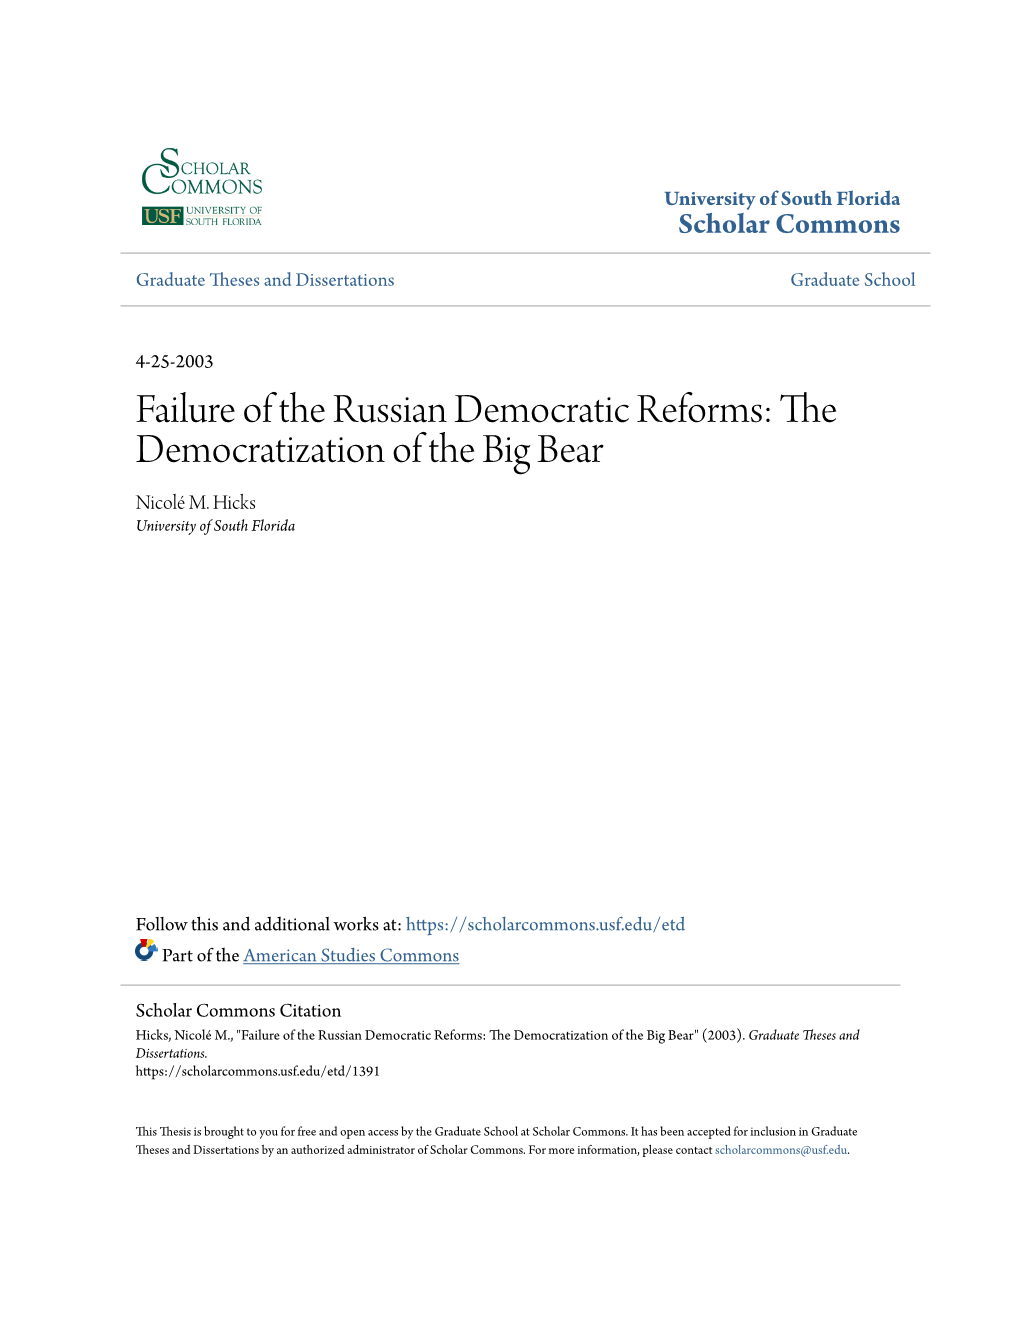 Failure of the Russian Democratic Reforms: the Democratization of the Big Bear Nicolé M